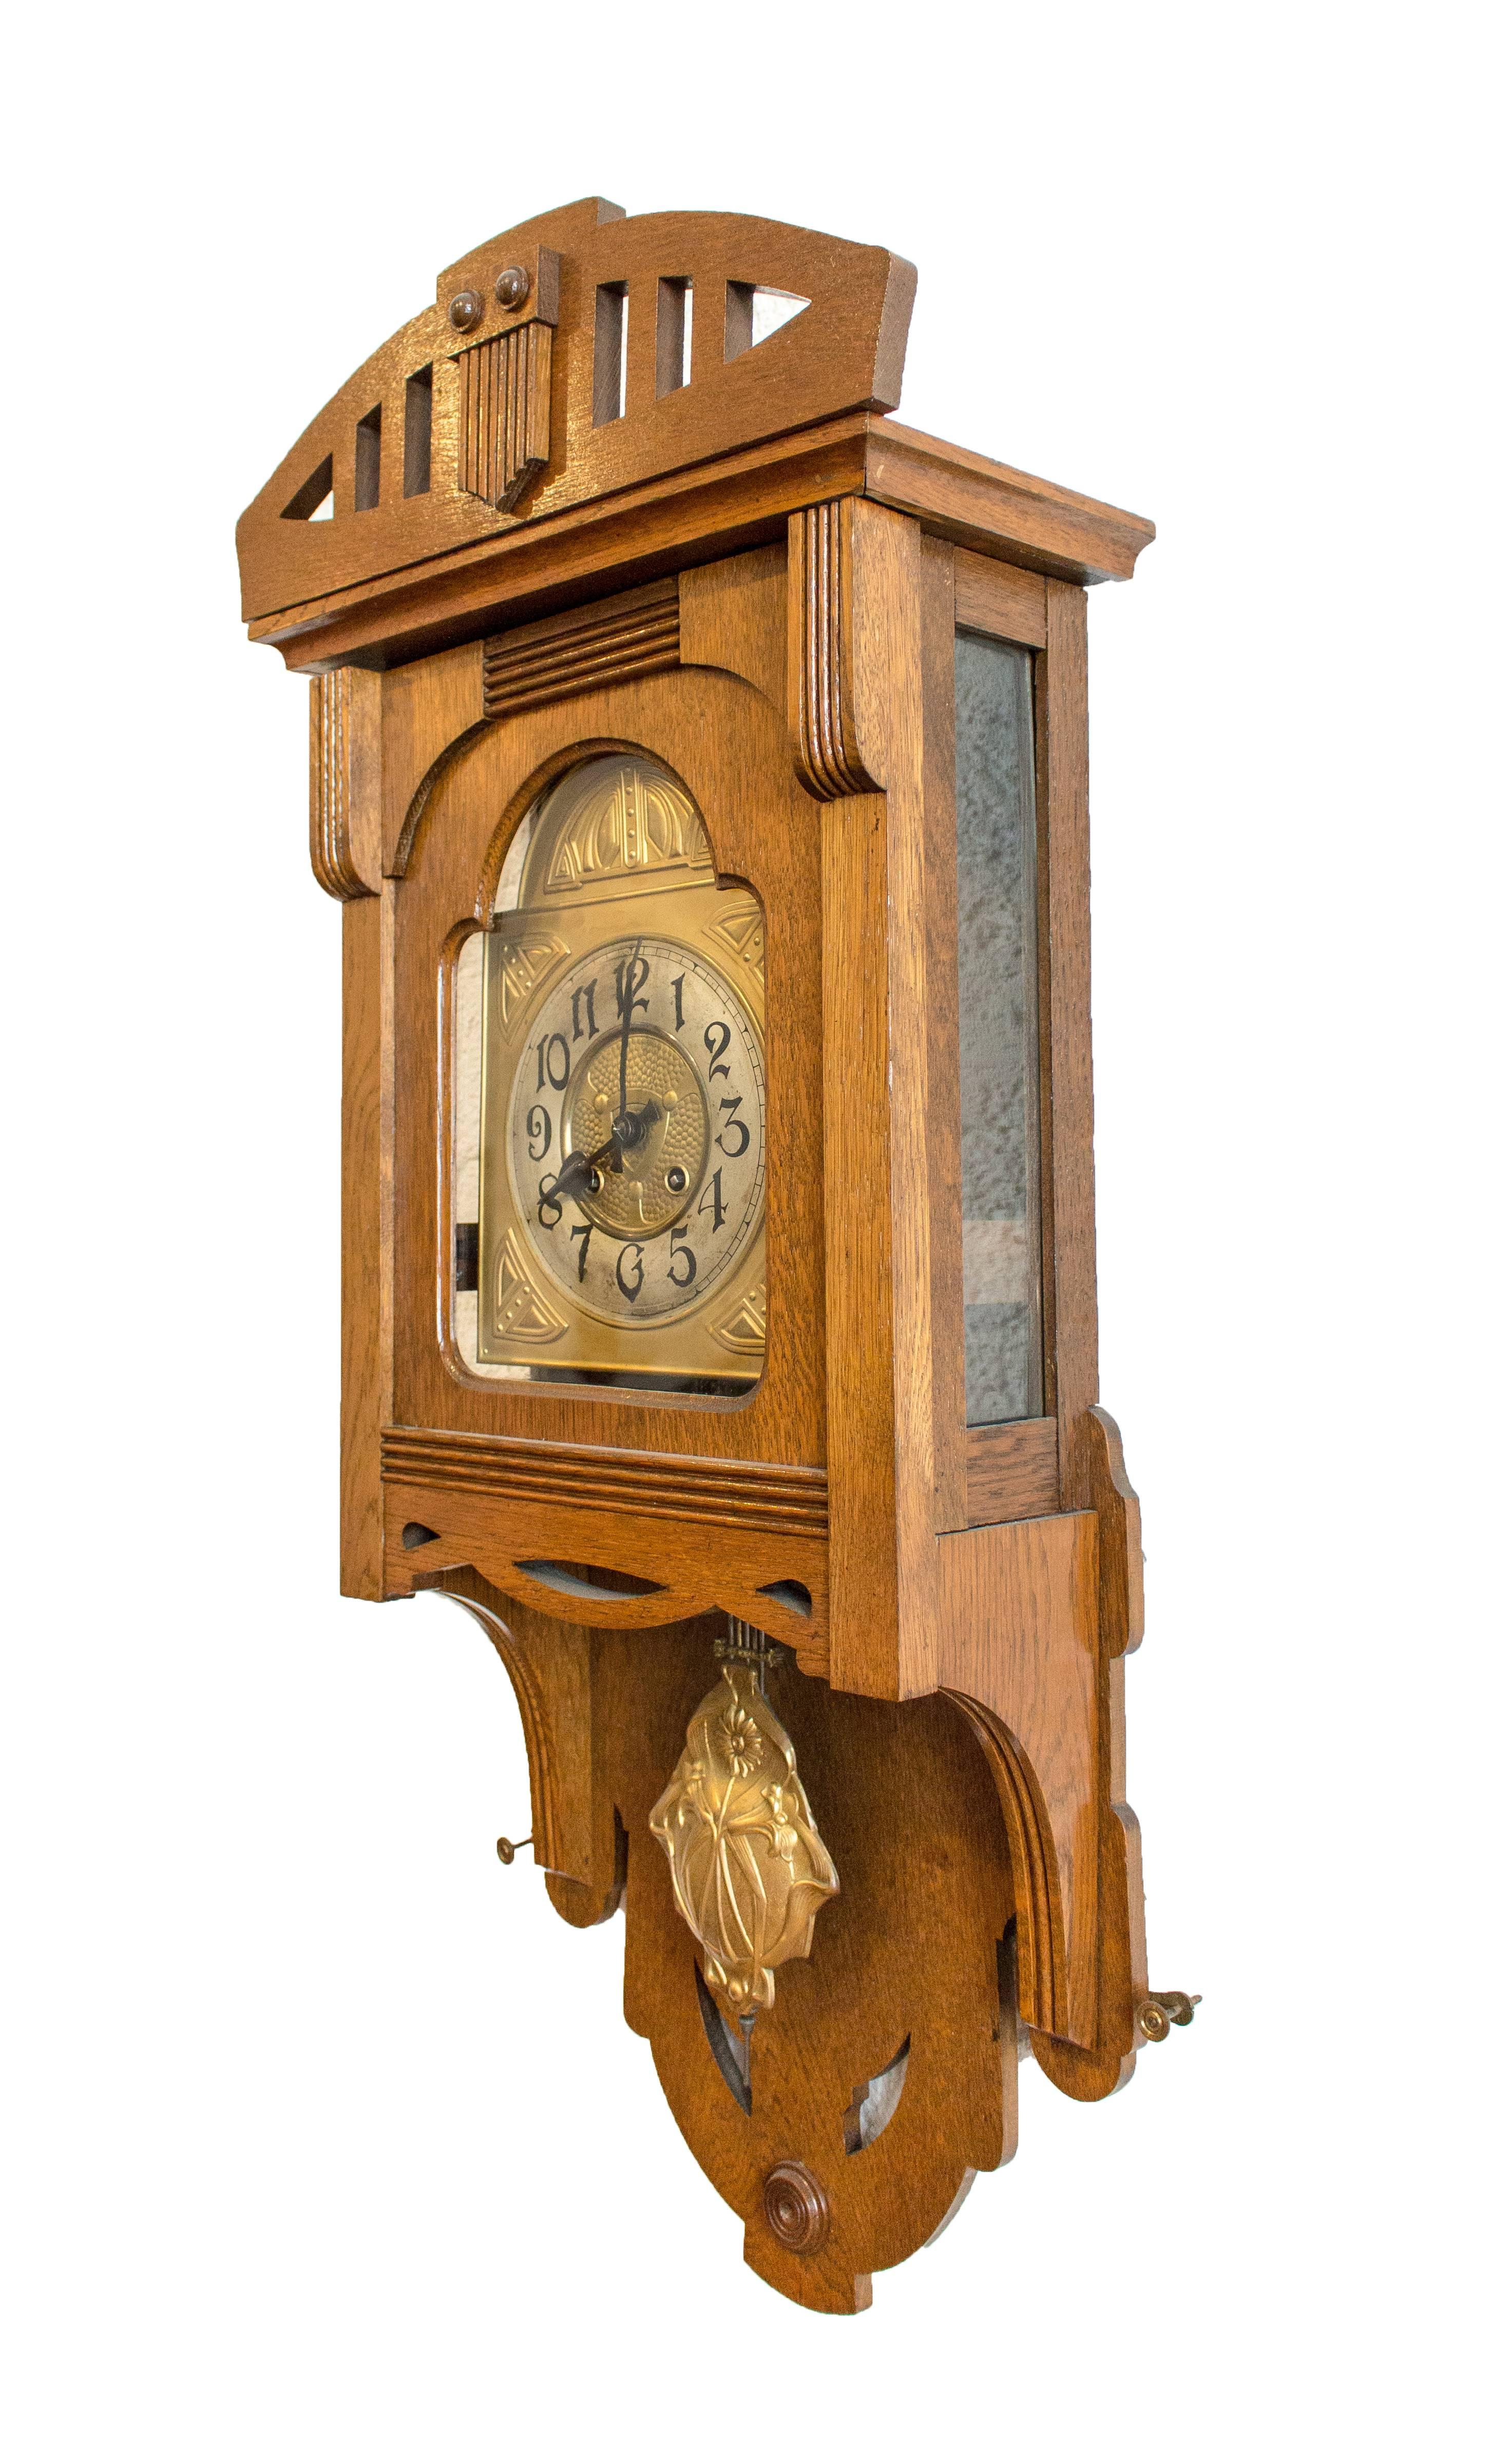 Beautiful Art Nouveau wall clock from the Art Nouveau period, circa 1905. The watch case is made of oak wood, the pendulum and the dial are made of brass.
The clock is very well restored and has been overhauled by a master watchmaker. 

This